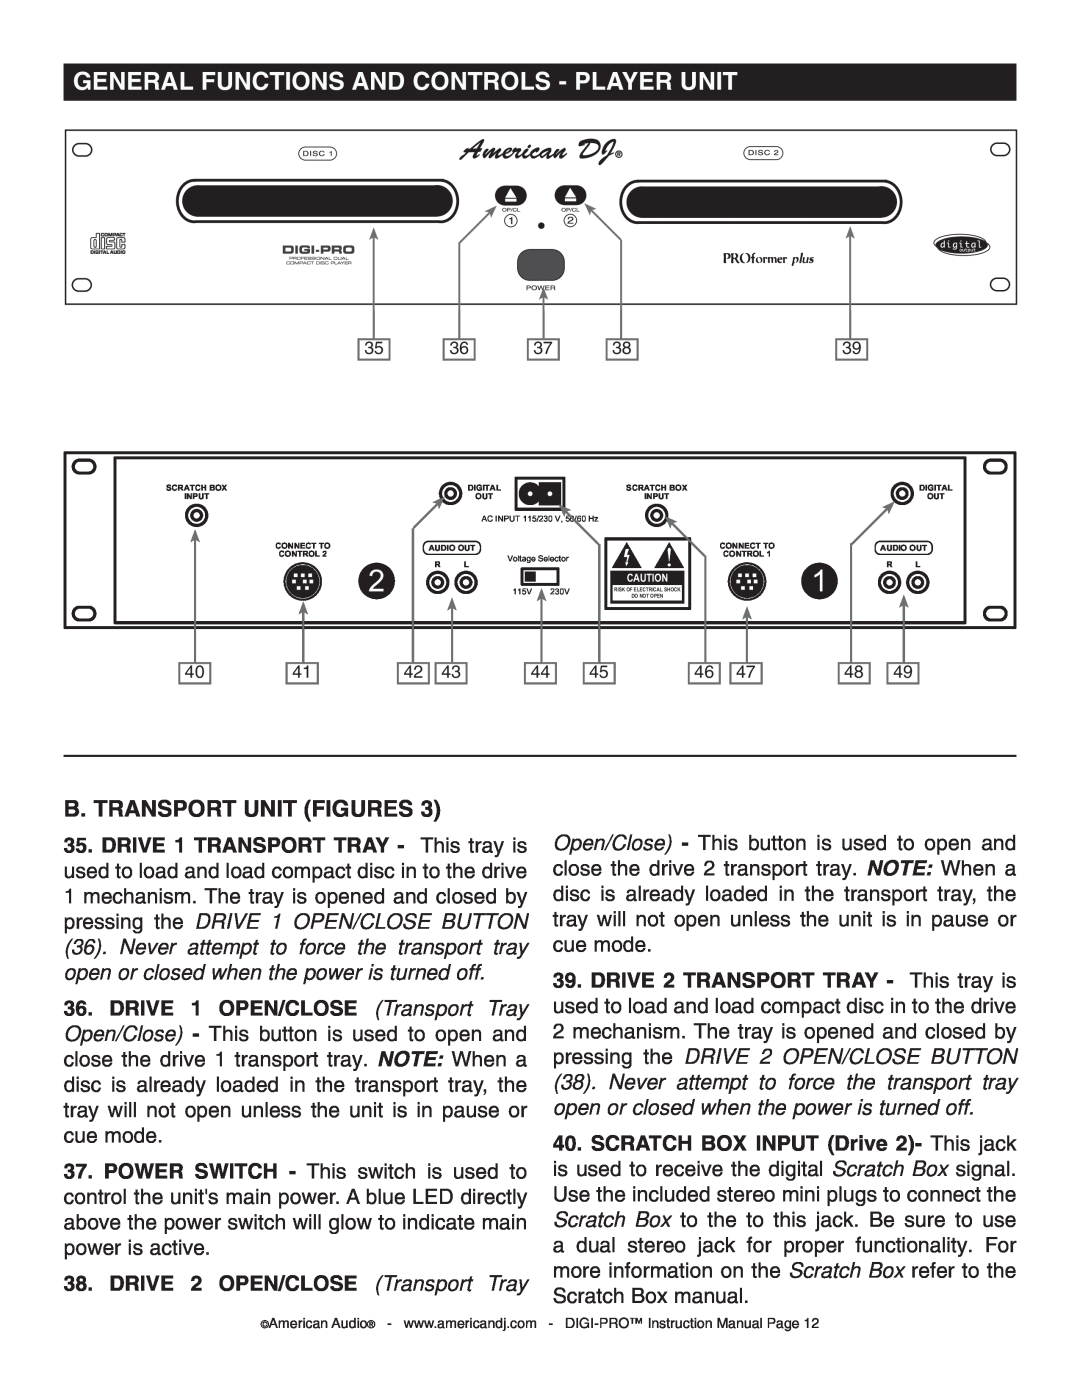 American Audio DIGI-PRO operating instructions General Functions And Controls - Player Unit, B. Transport Unit Figures 